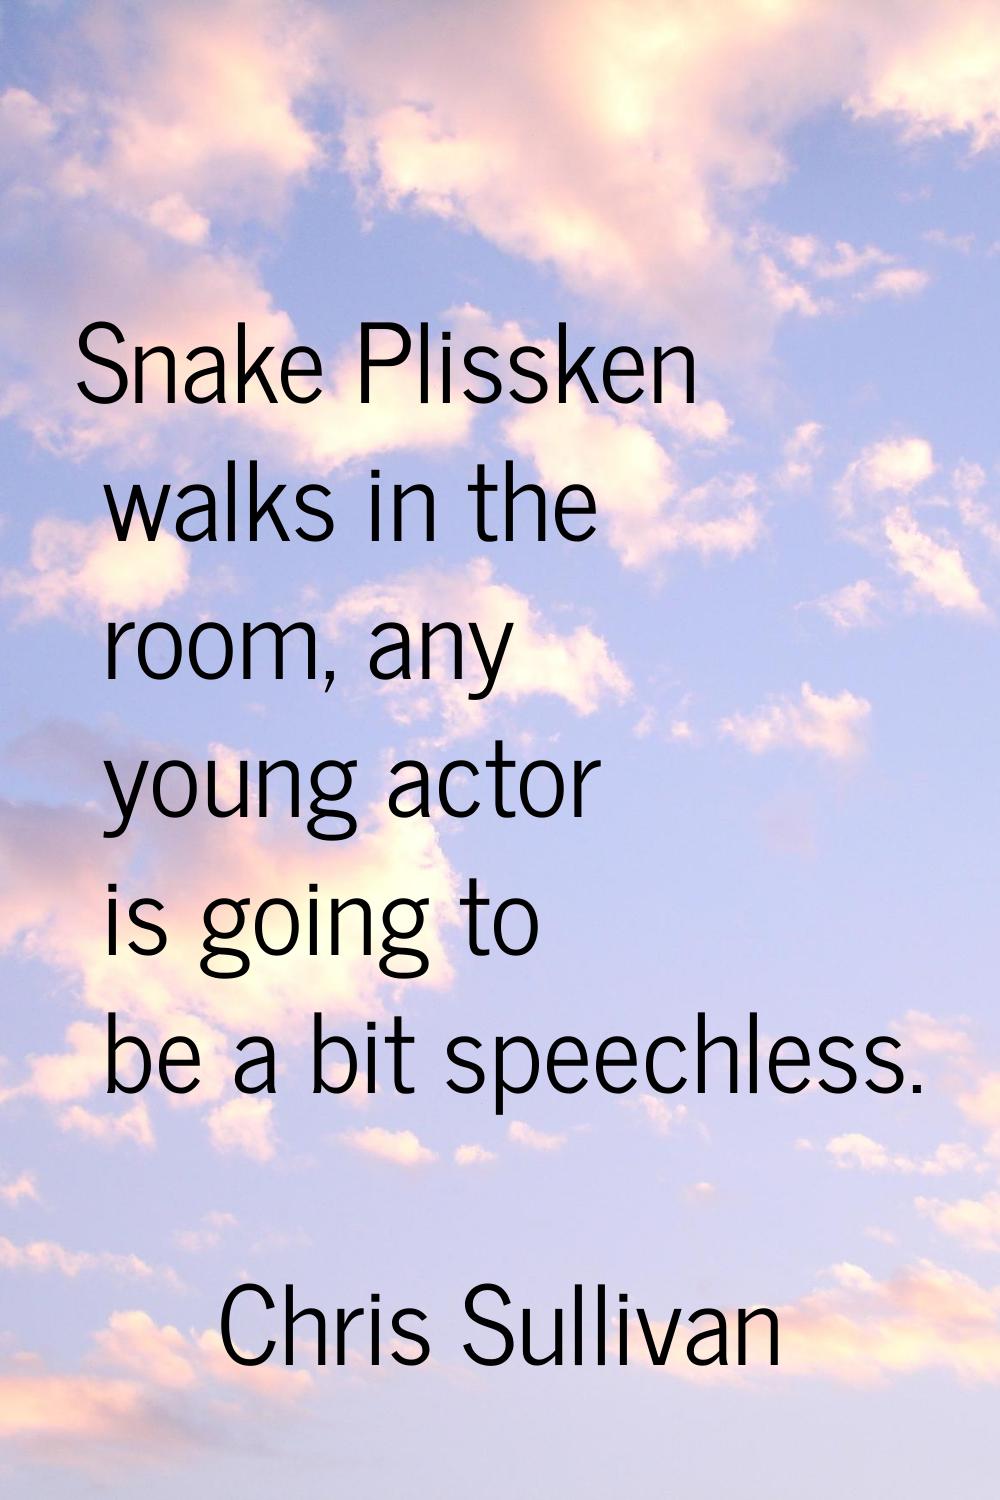 Snake Plissken walks in the room, any young actor is going to be a bit speechless.